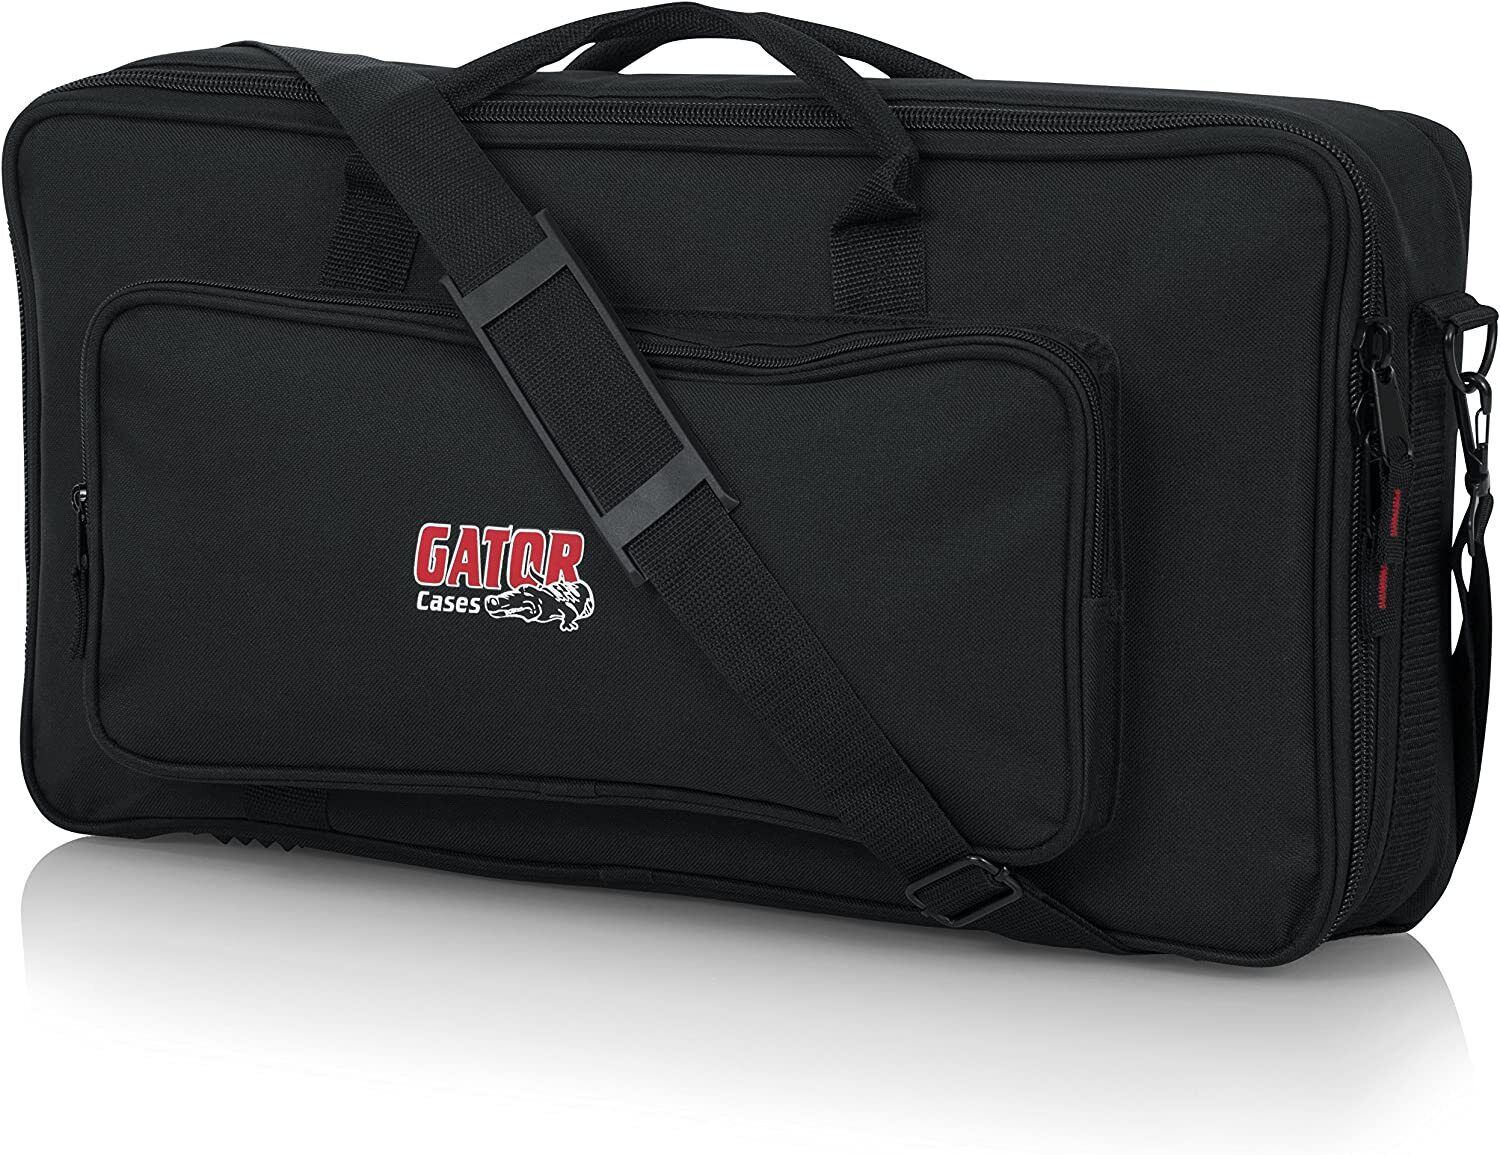 Gig Bag For Micro Controllers 22 5 X 11 5 X 4 By Gator